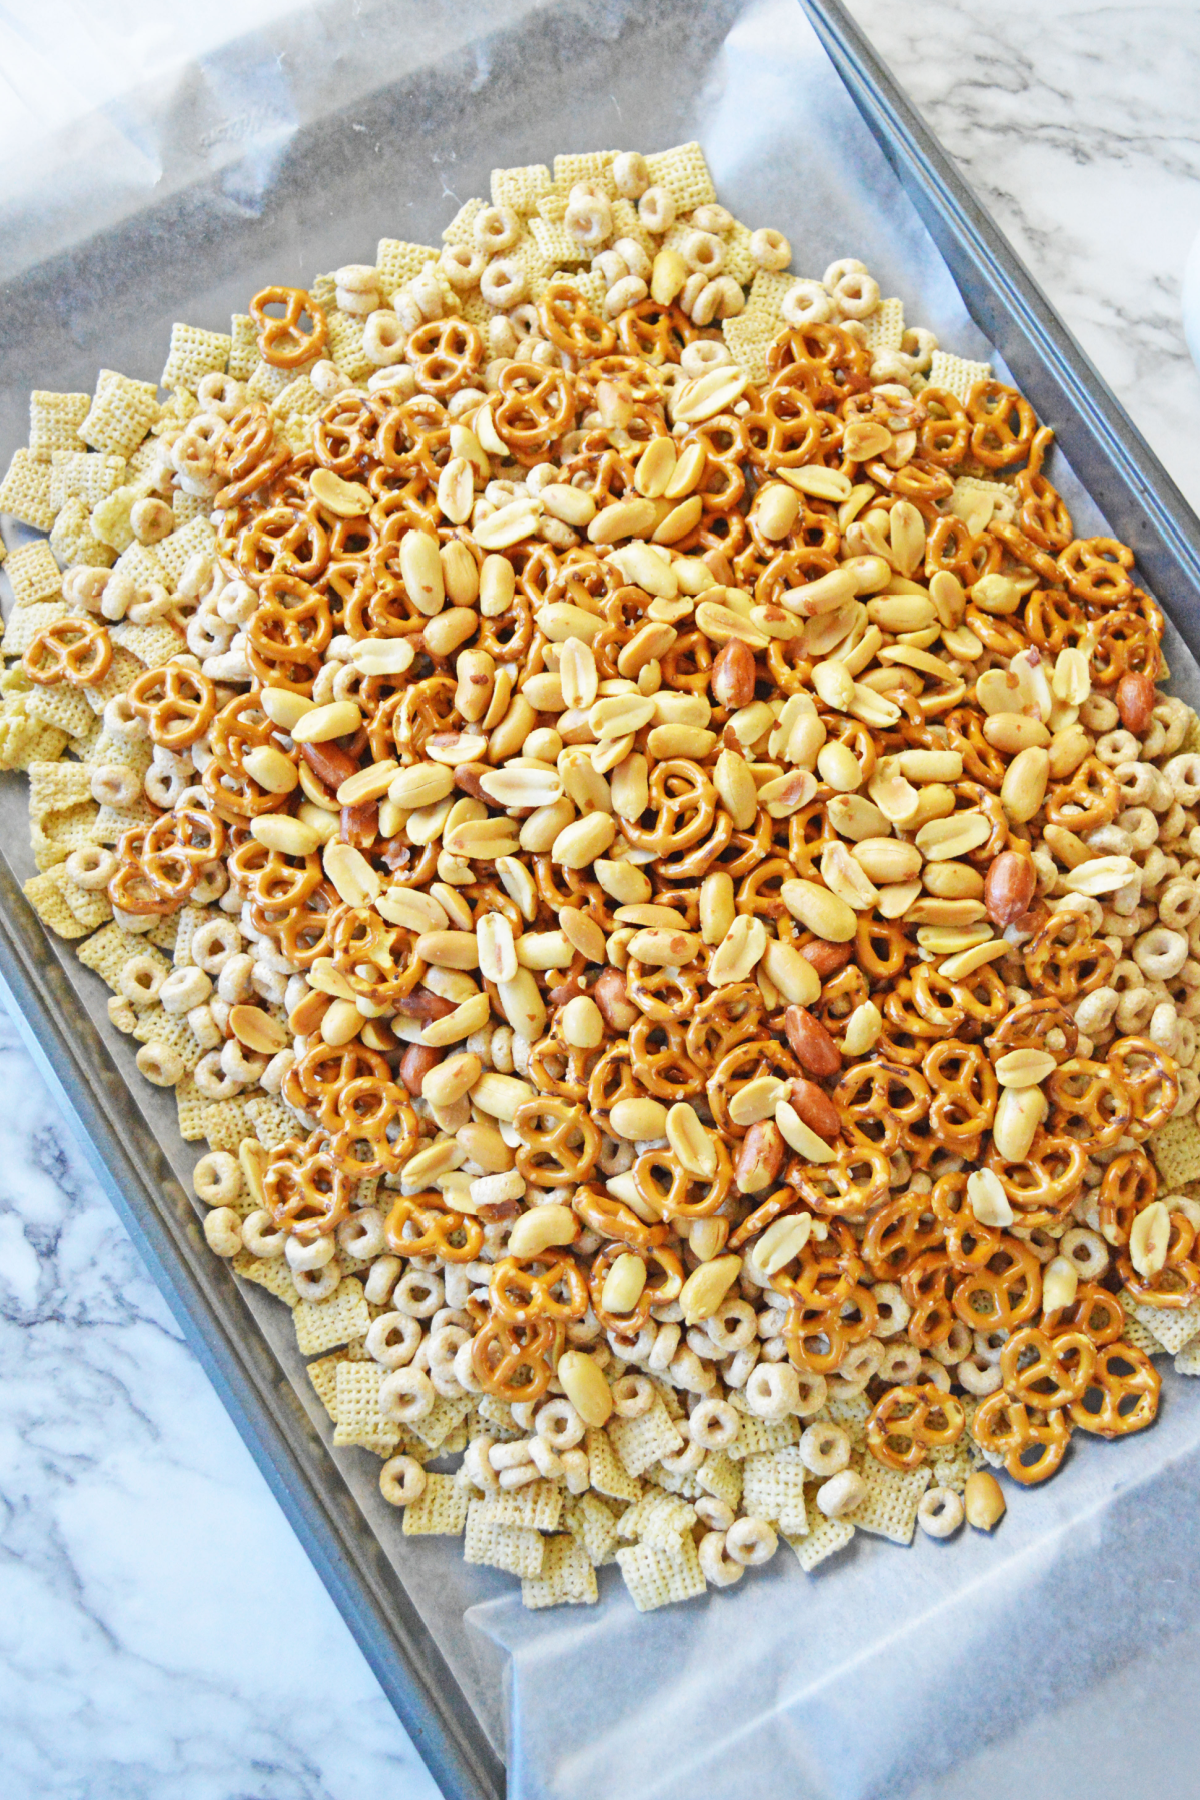 Snack mix on cookie sheet